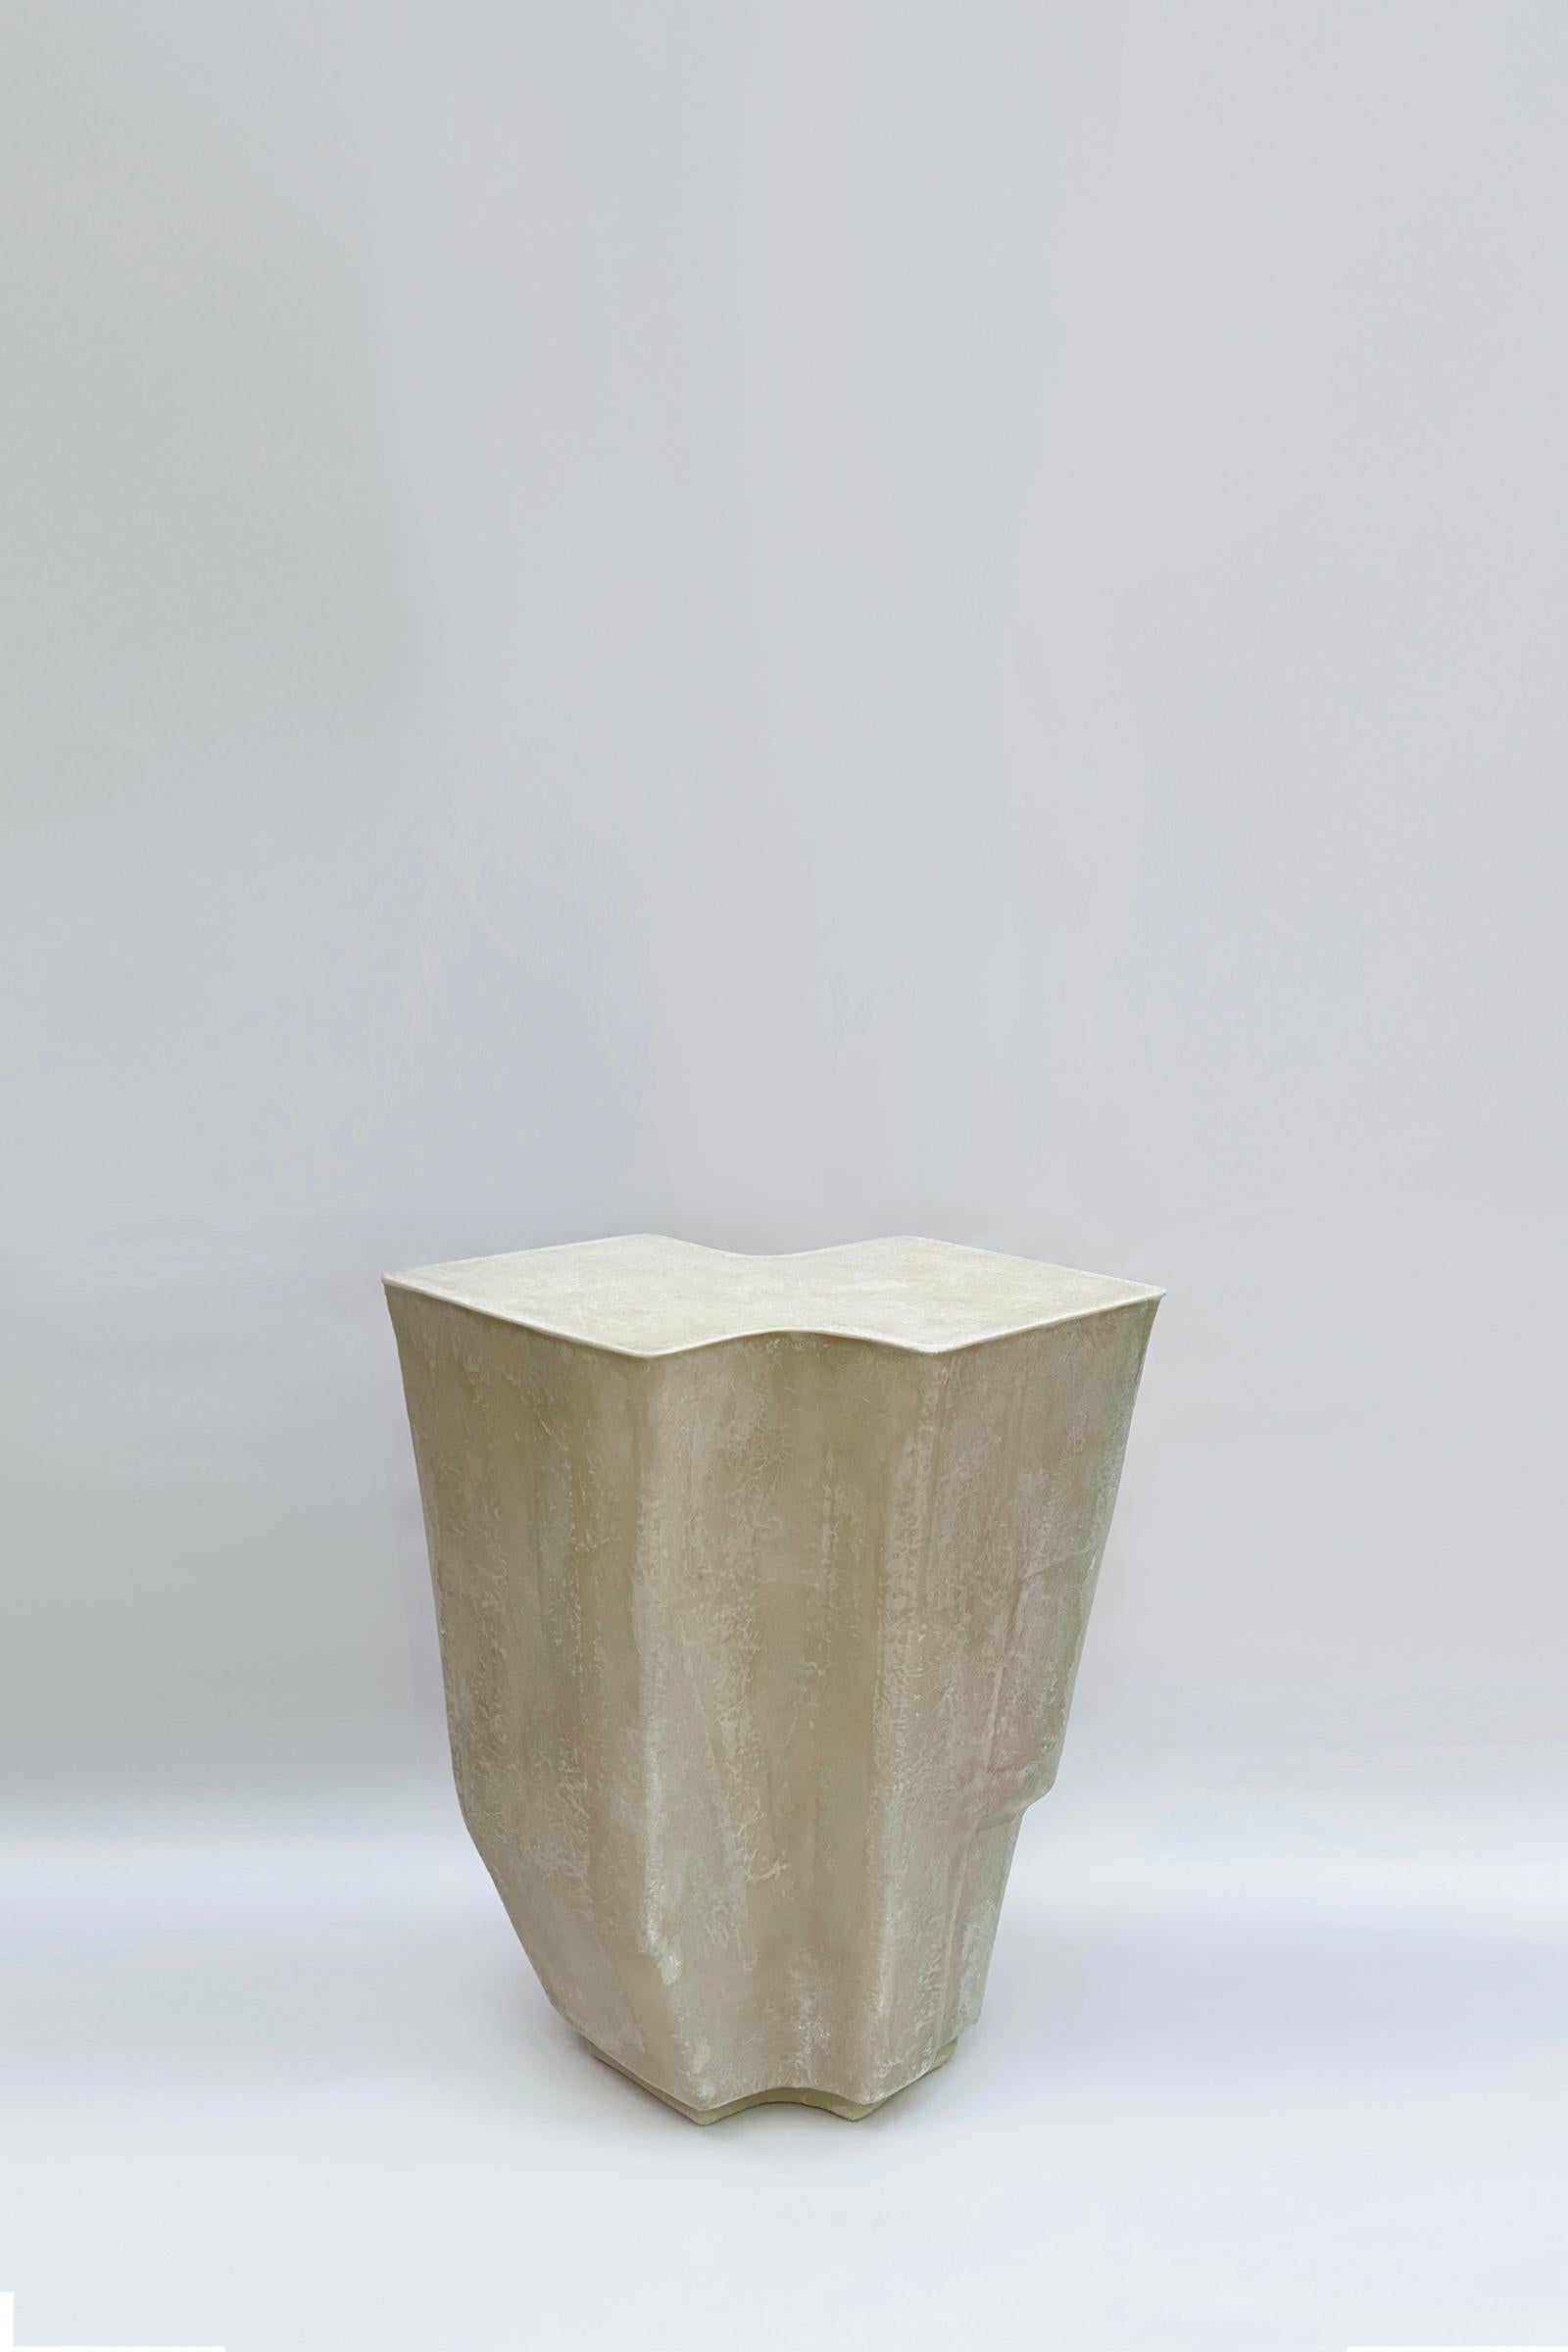 Hand-Crafted Clam High by VAVA Objects, handcrafted fiberglass side table made in Sweden